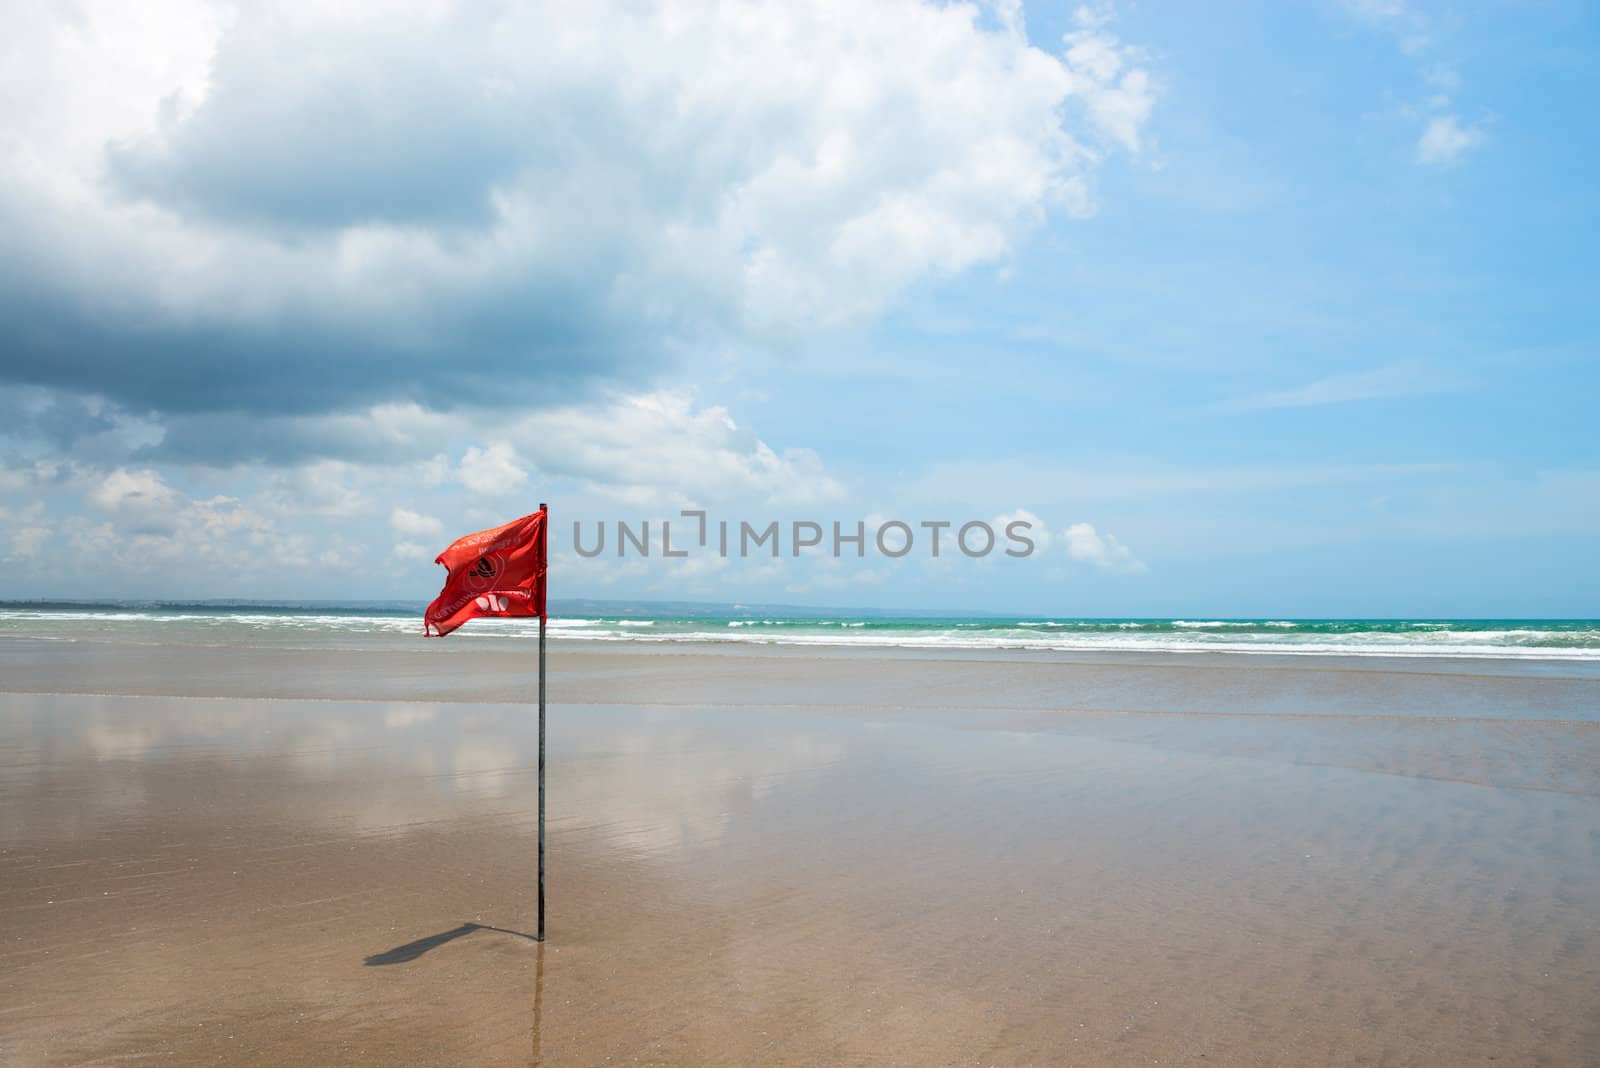 Red flag on beach with no swimming notes. Season of storms and strong currents.